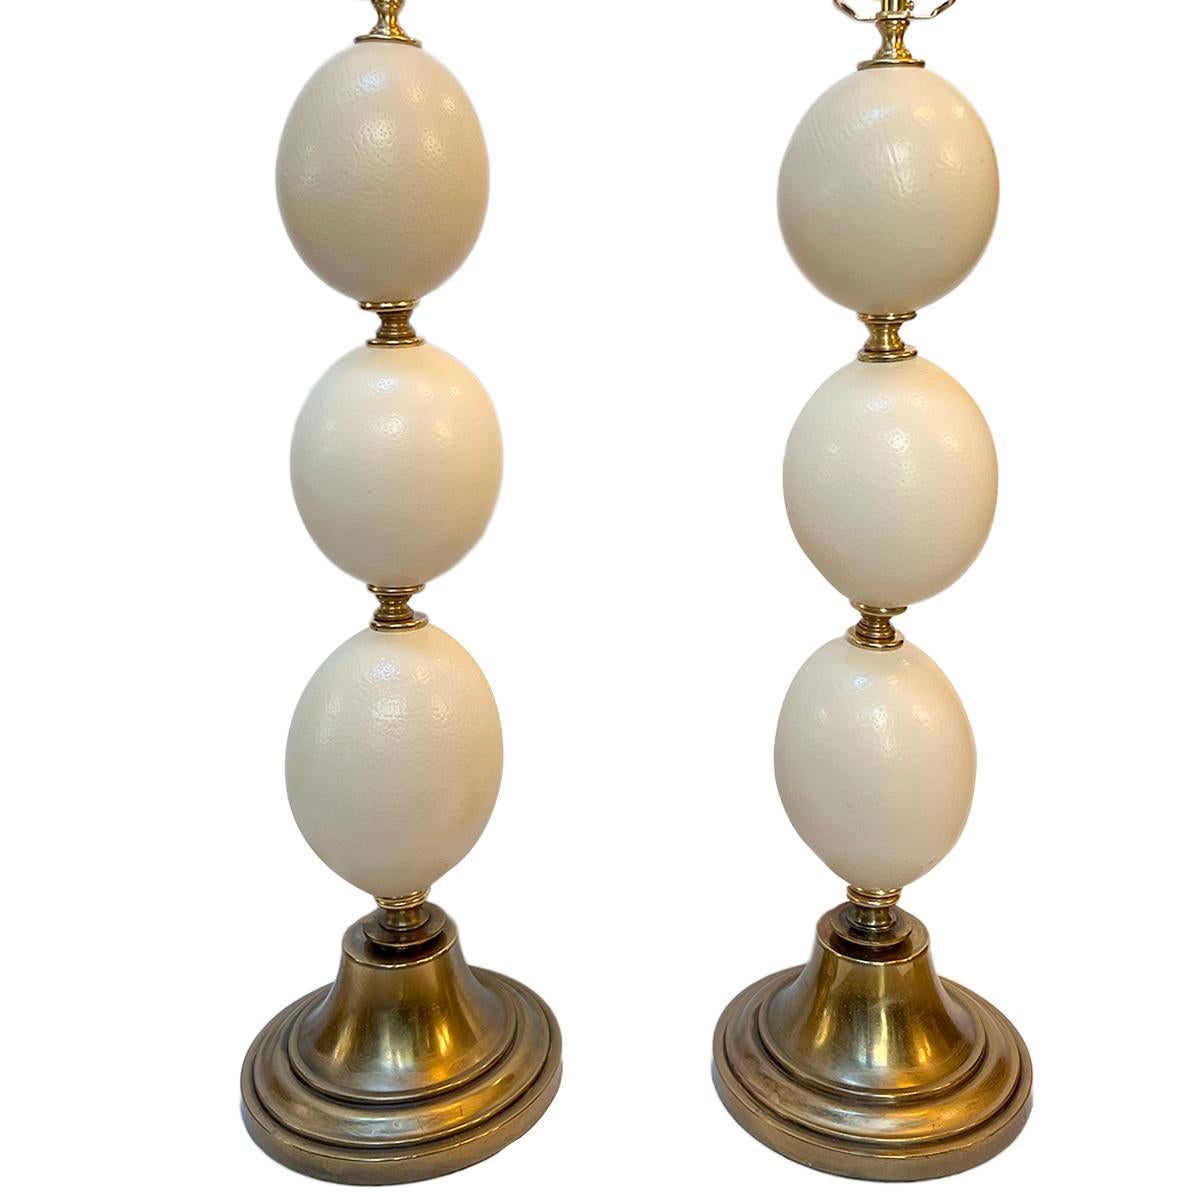 Pair of circa 1970's ostrich egg table lamps with bronze base and fittings.

Measurements:
Height of body: 28.25